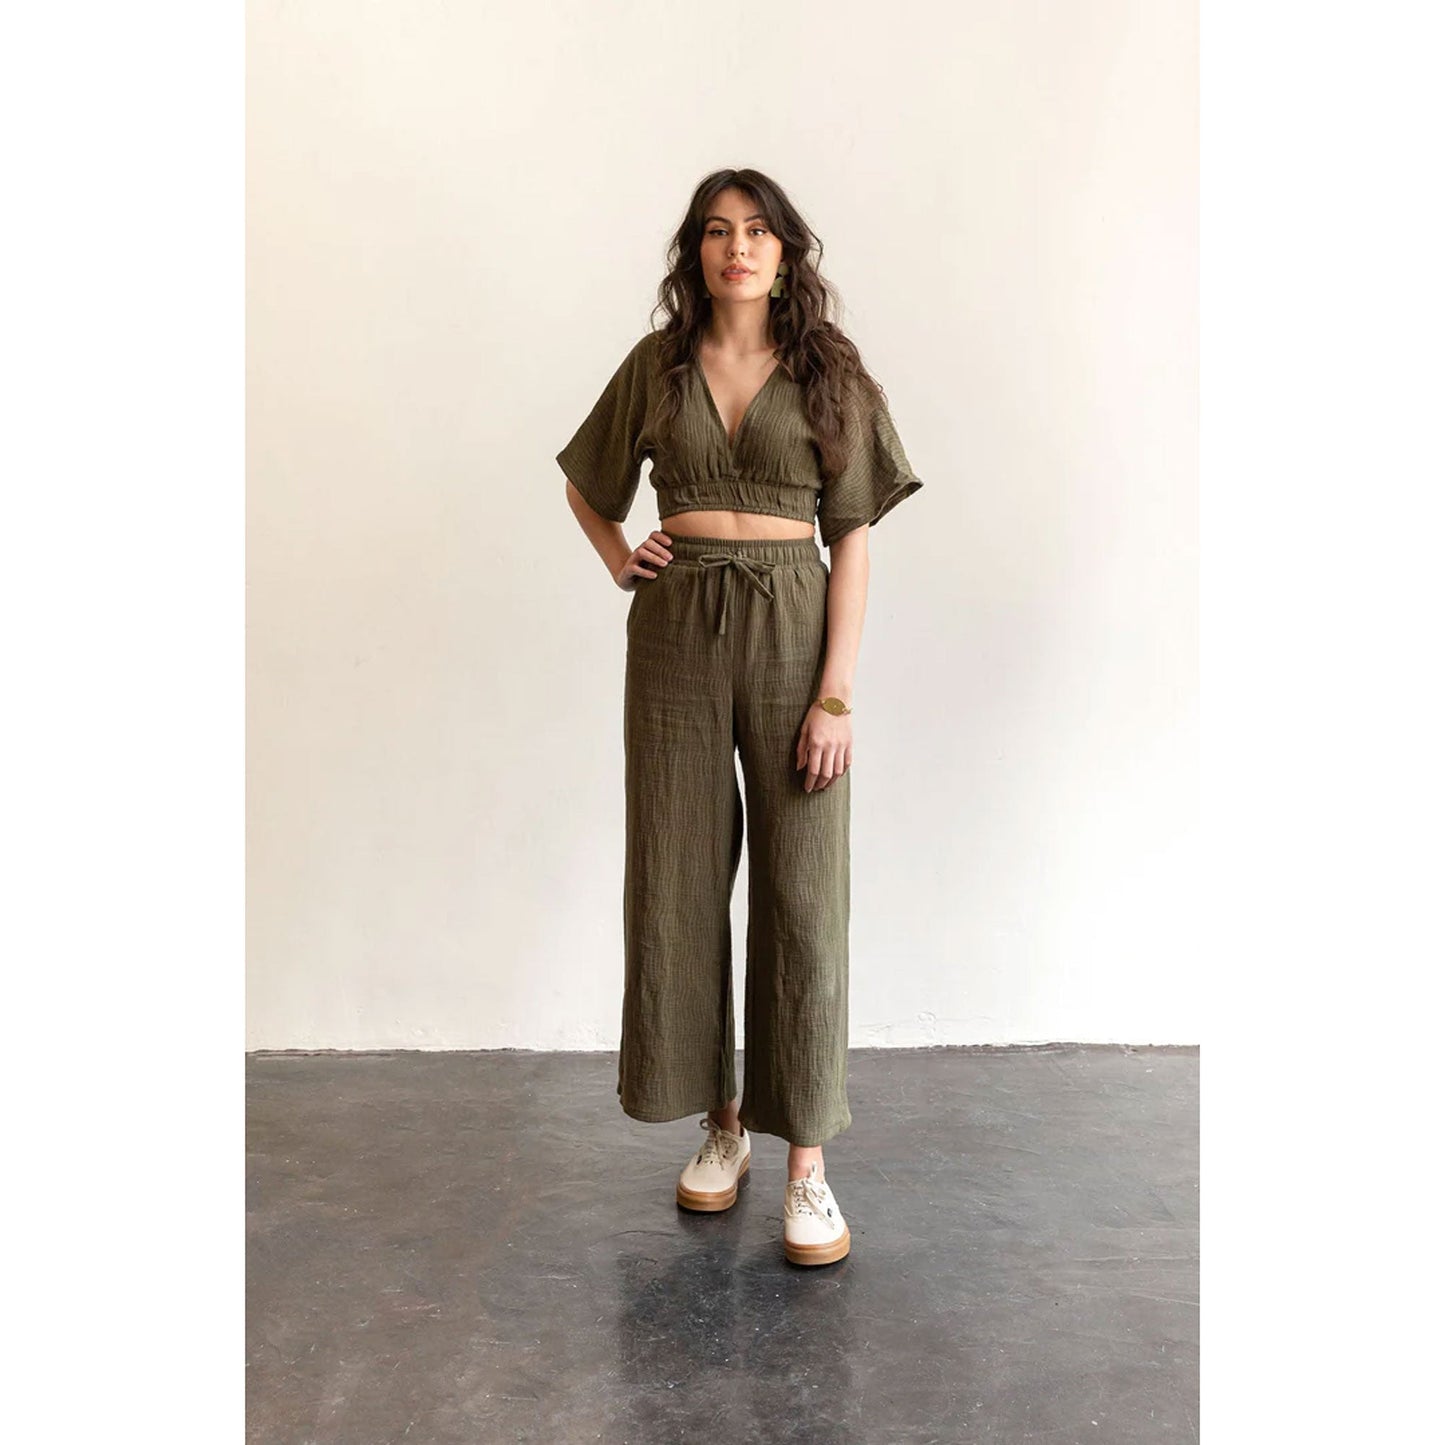 The Saguaro Top & Trouser Sewing Pattern - Friday Pattern Company